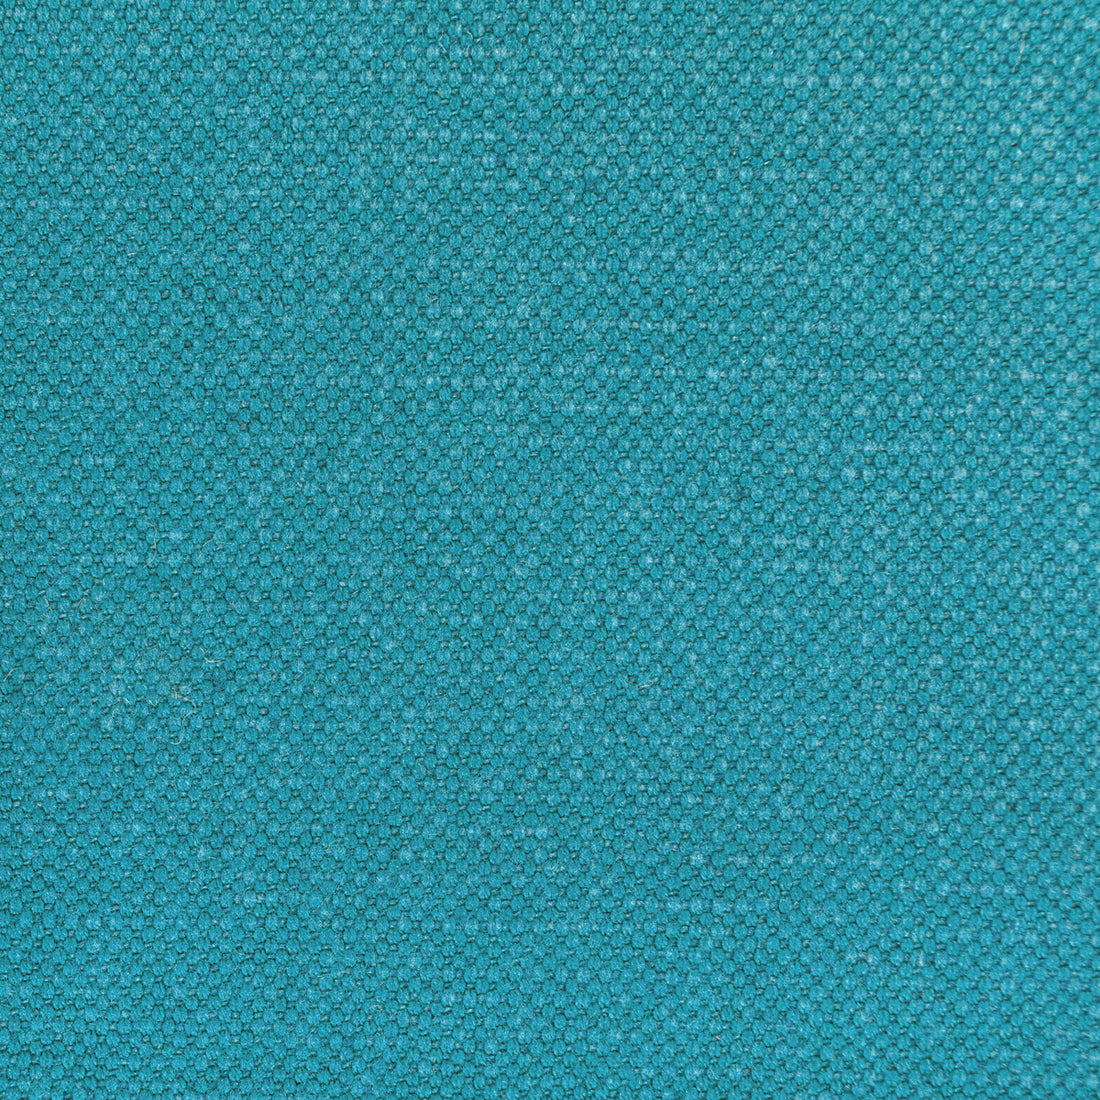 Carson fabric in teal color - pattern 36282.5.0 - by Kravet Basics